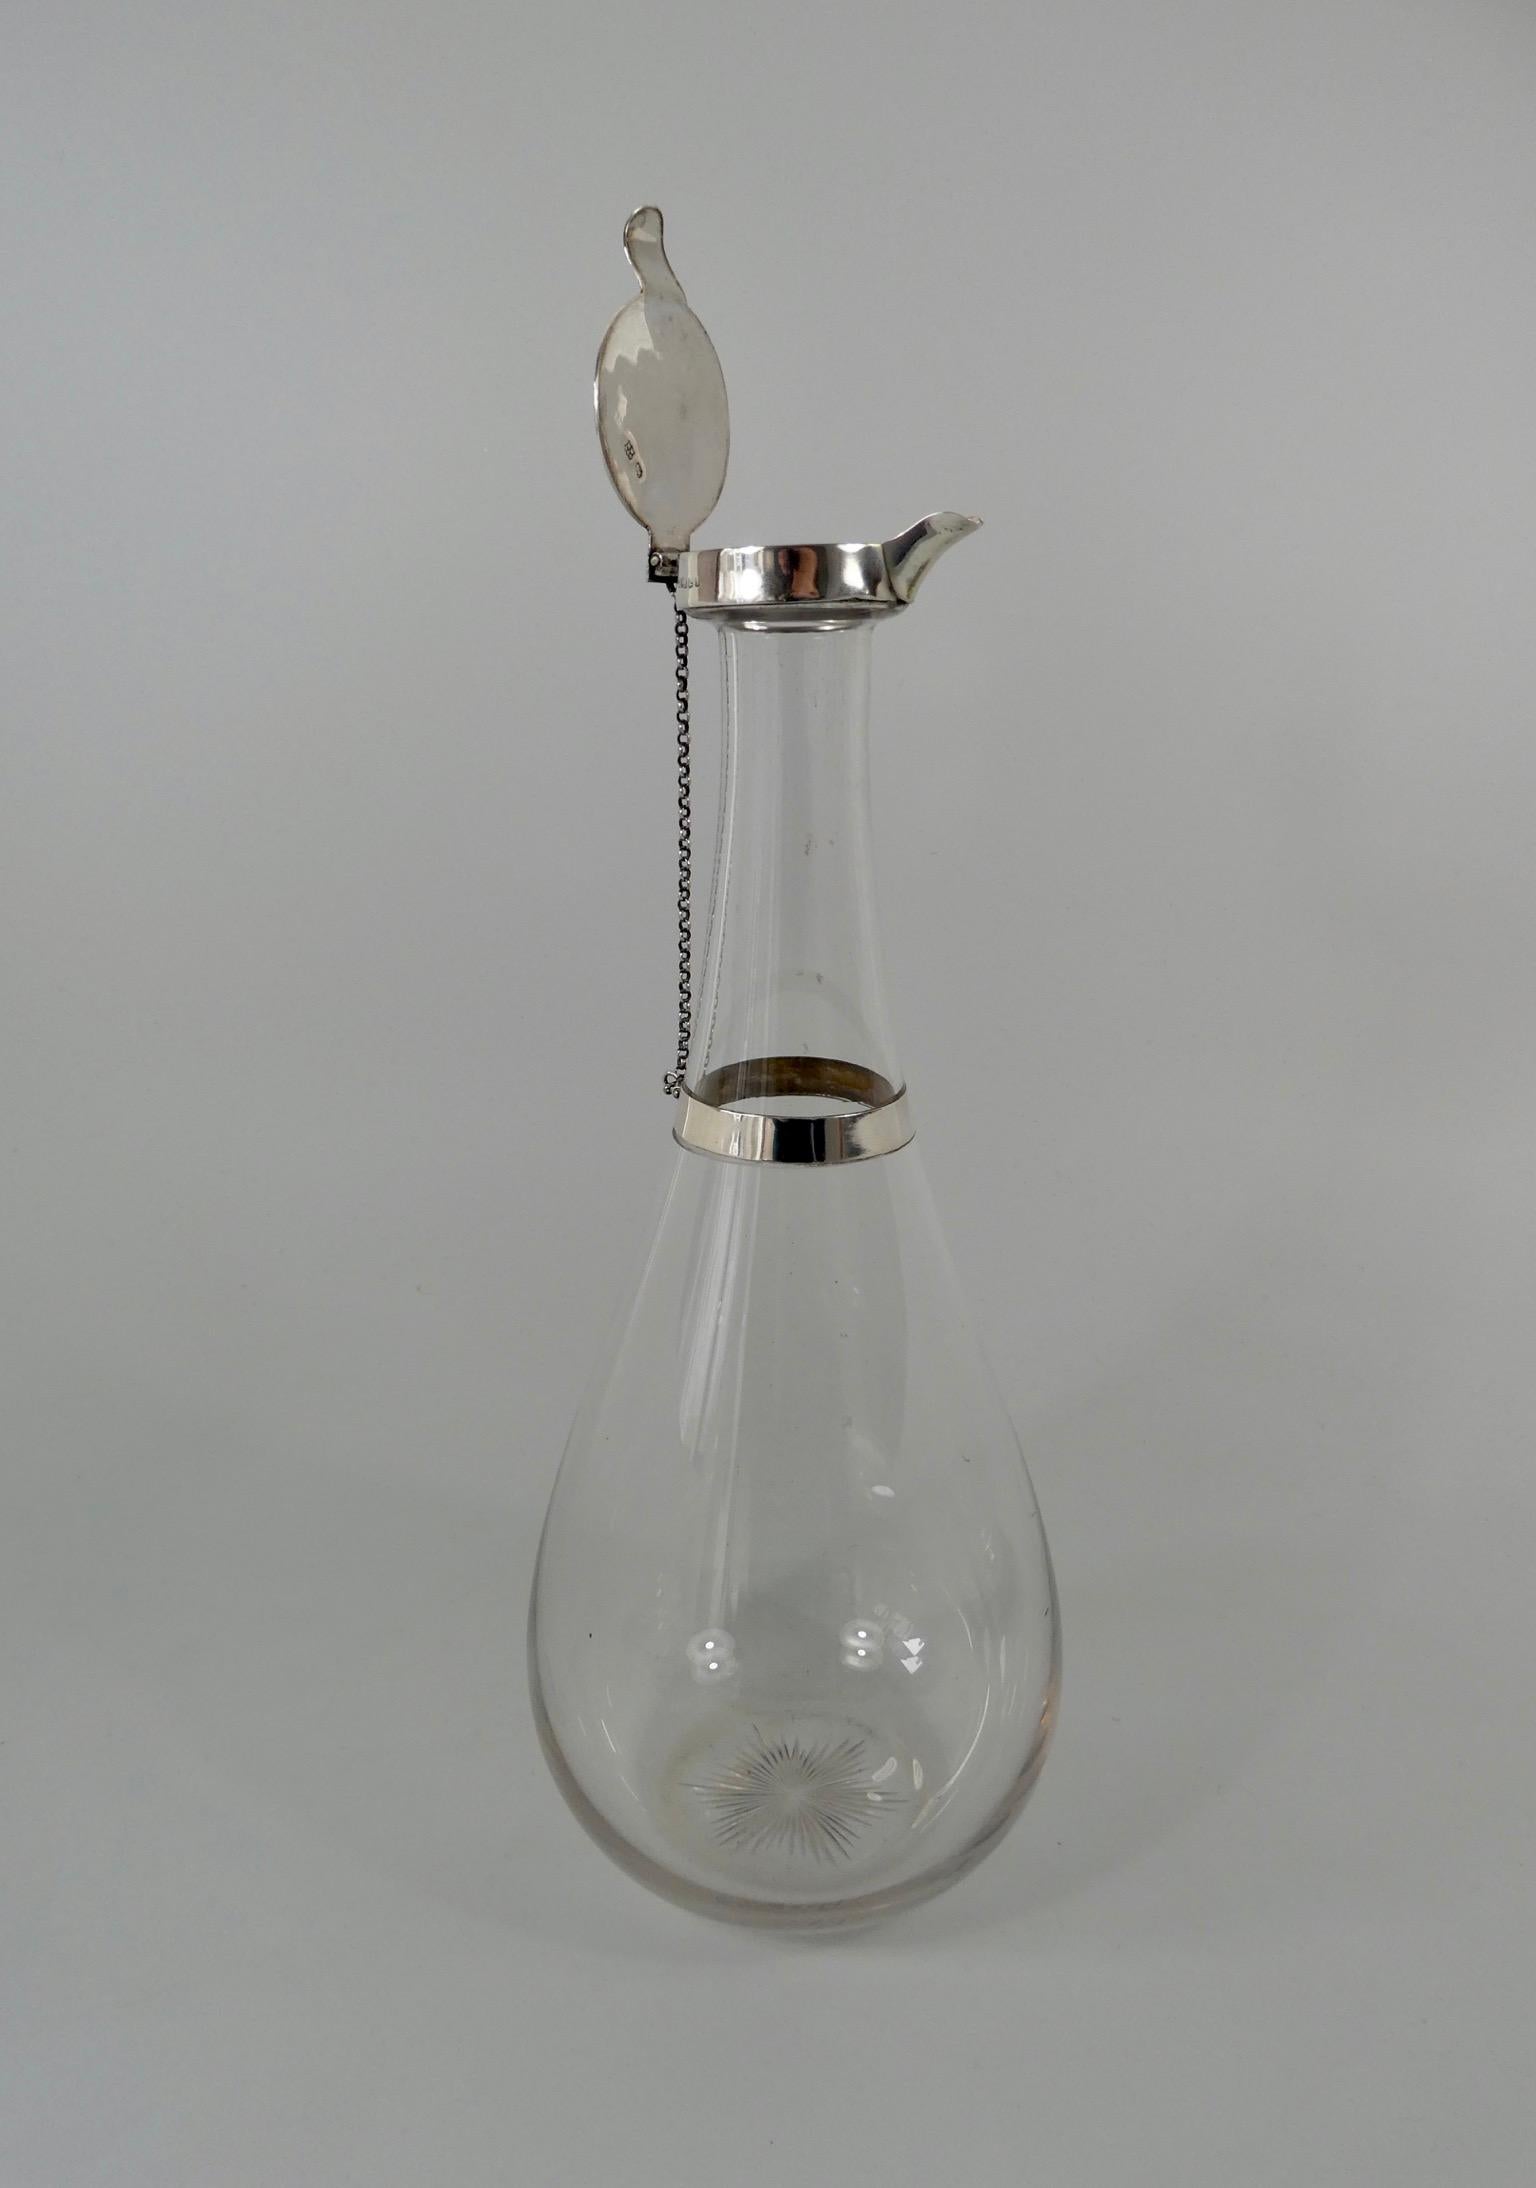 Other Christopher Dresser Designed Silver Mounted Glass Decanter, Dated 1879